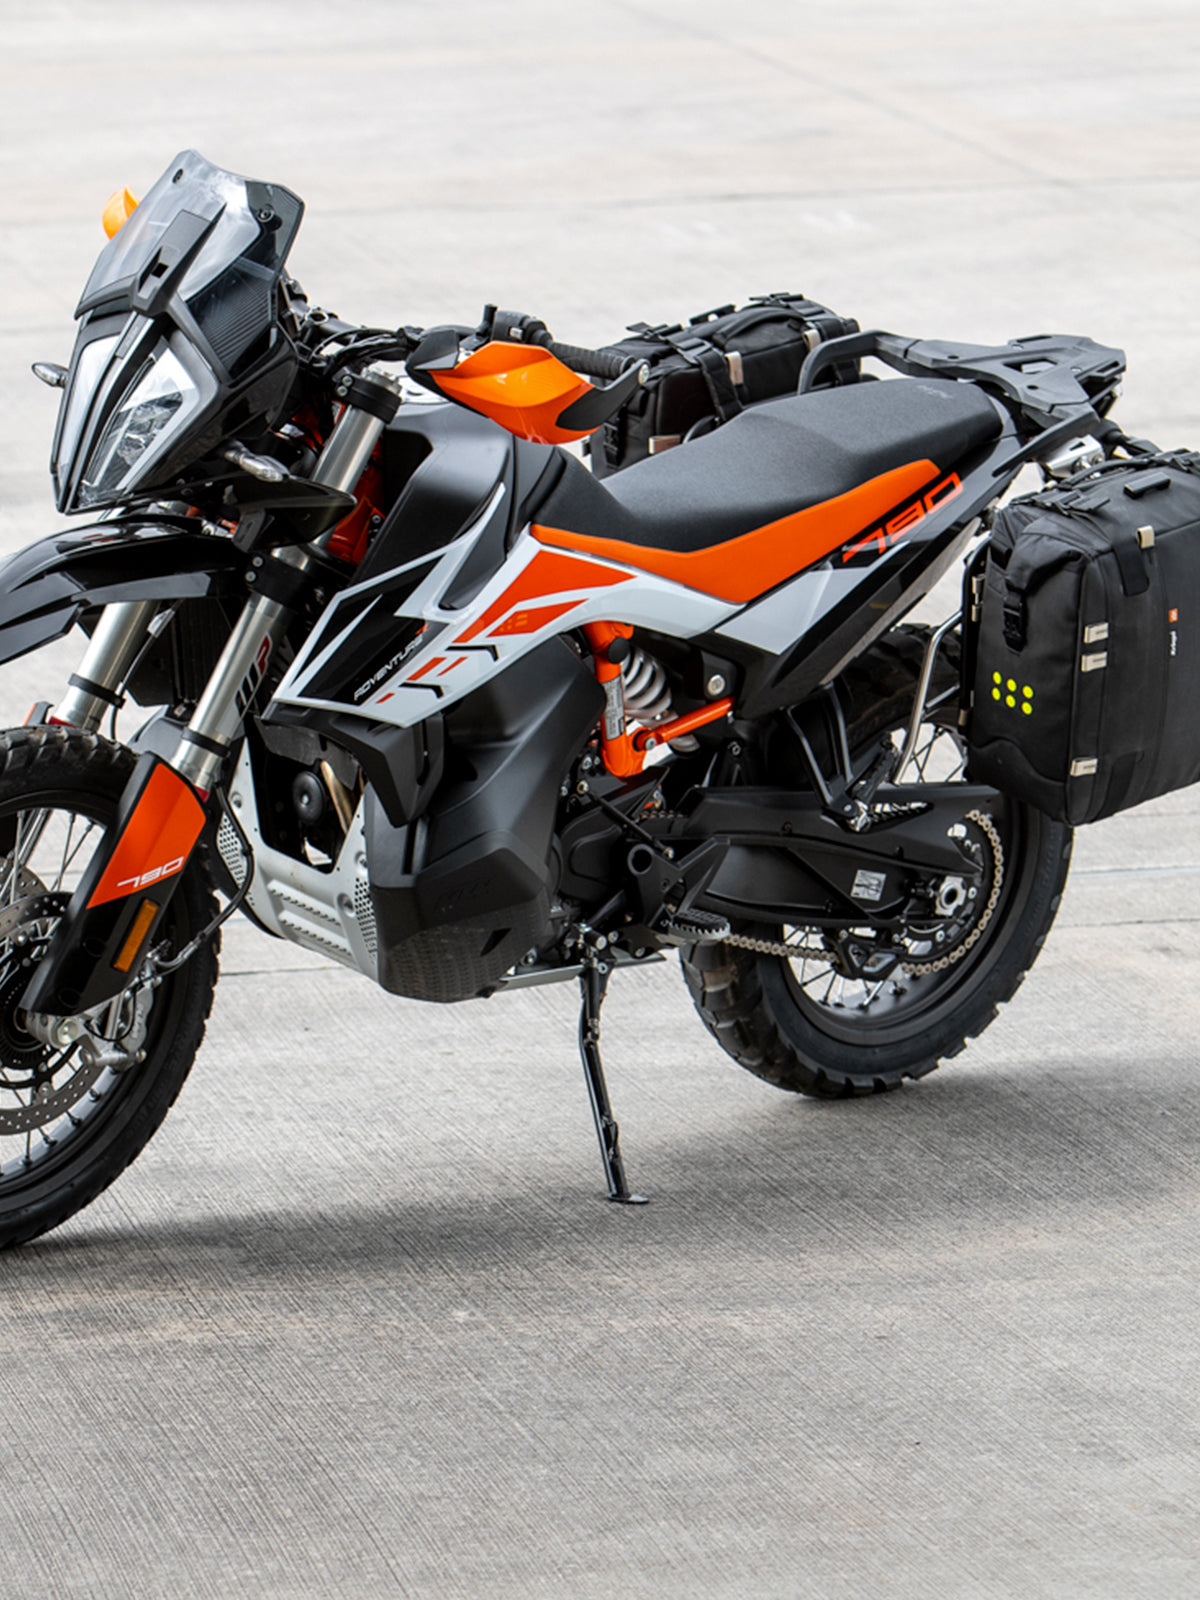 Kriega OS-32 Soft Pannier fitted to rear of ktm